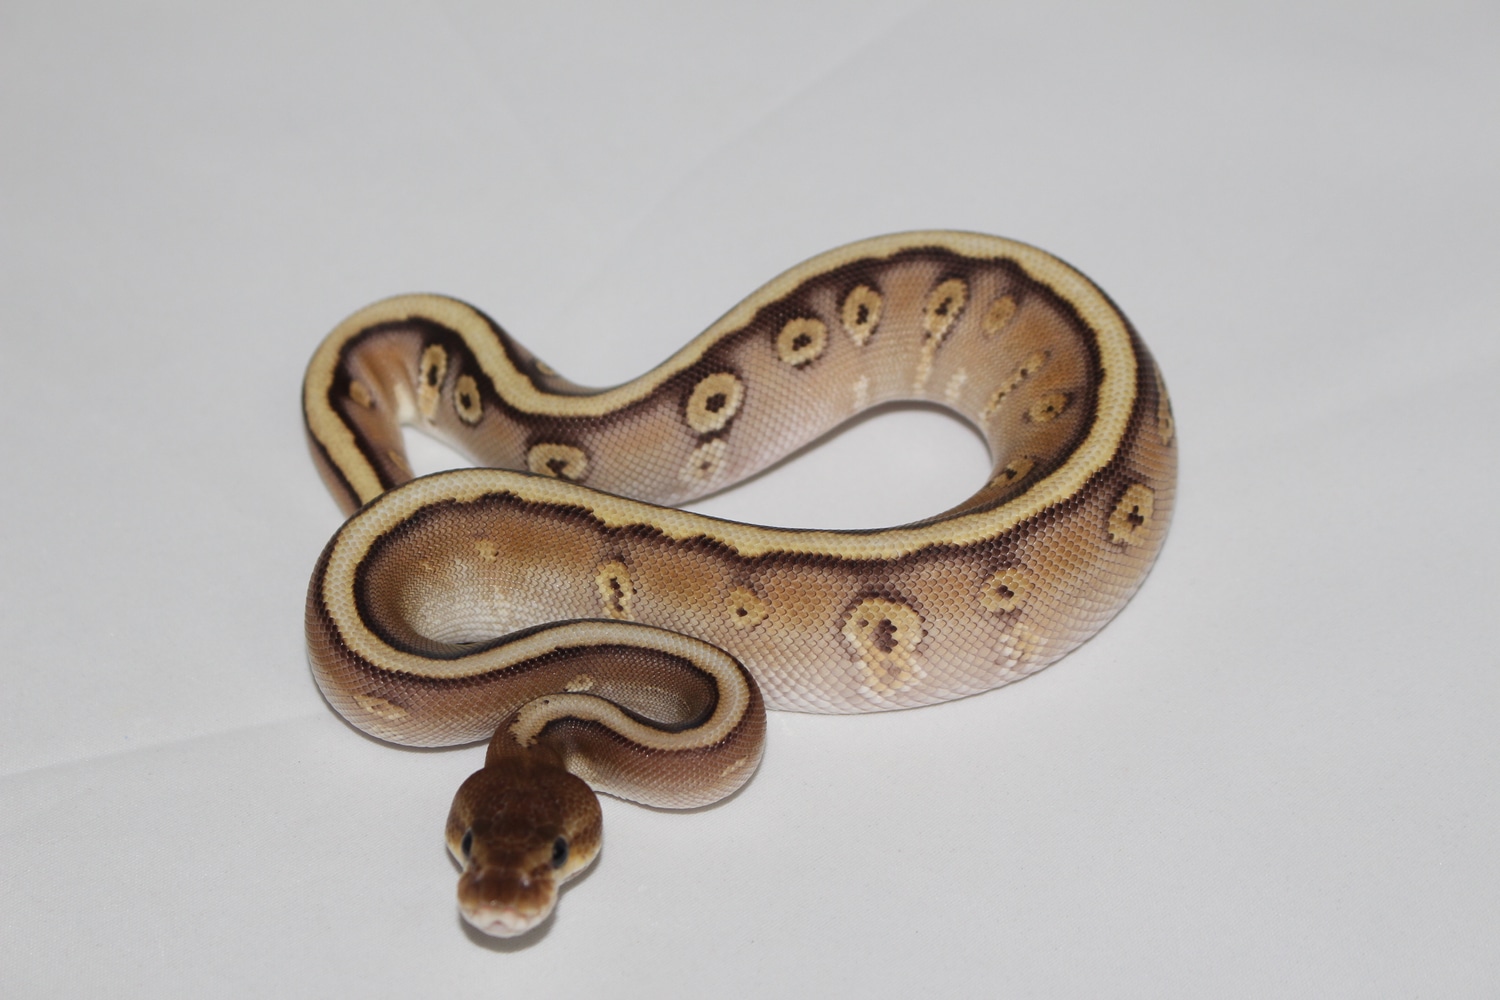 Mojave Enchi HGW Possible Odium Ball Python by Osmun Reptiles